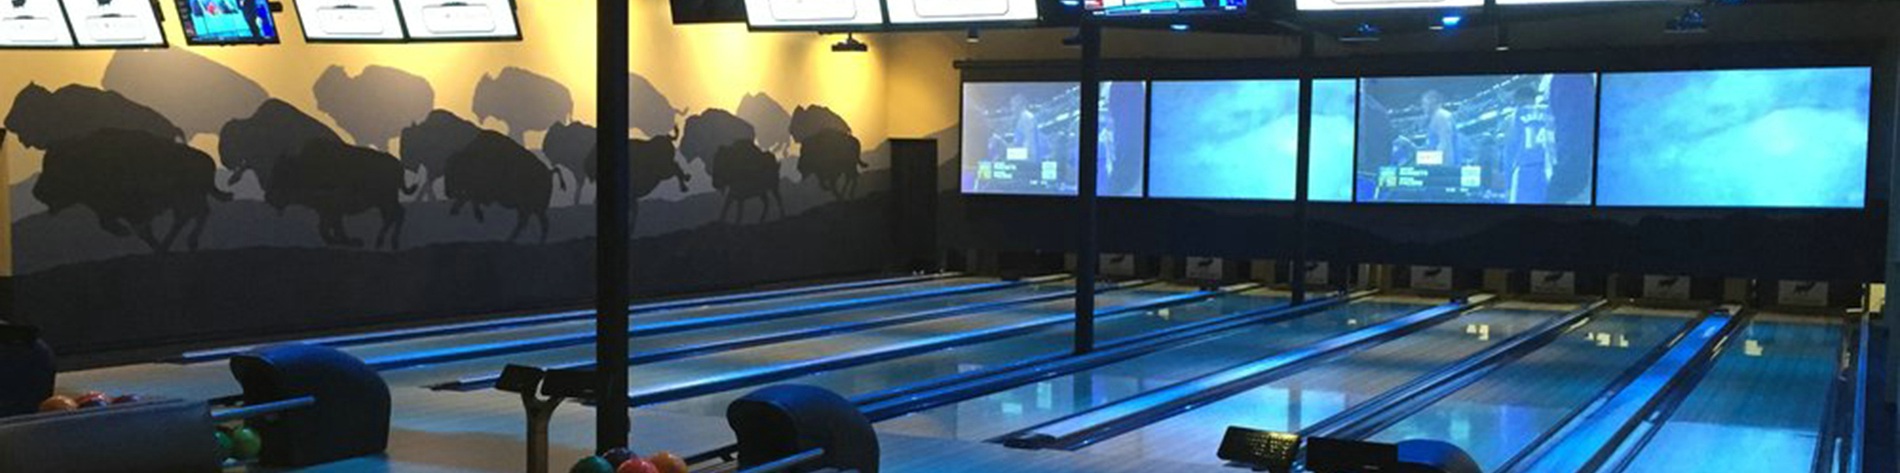 Bowling Alley Equipment